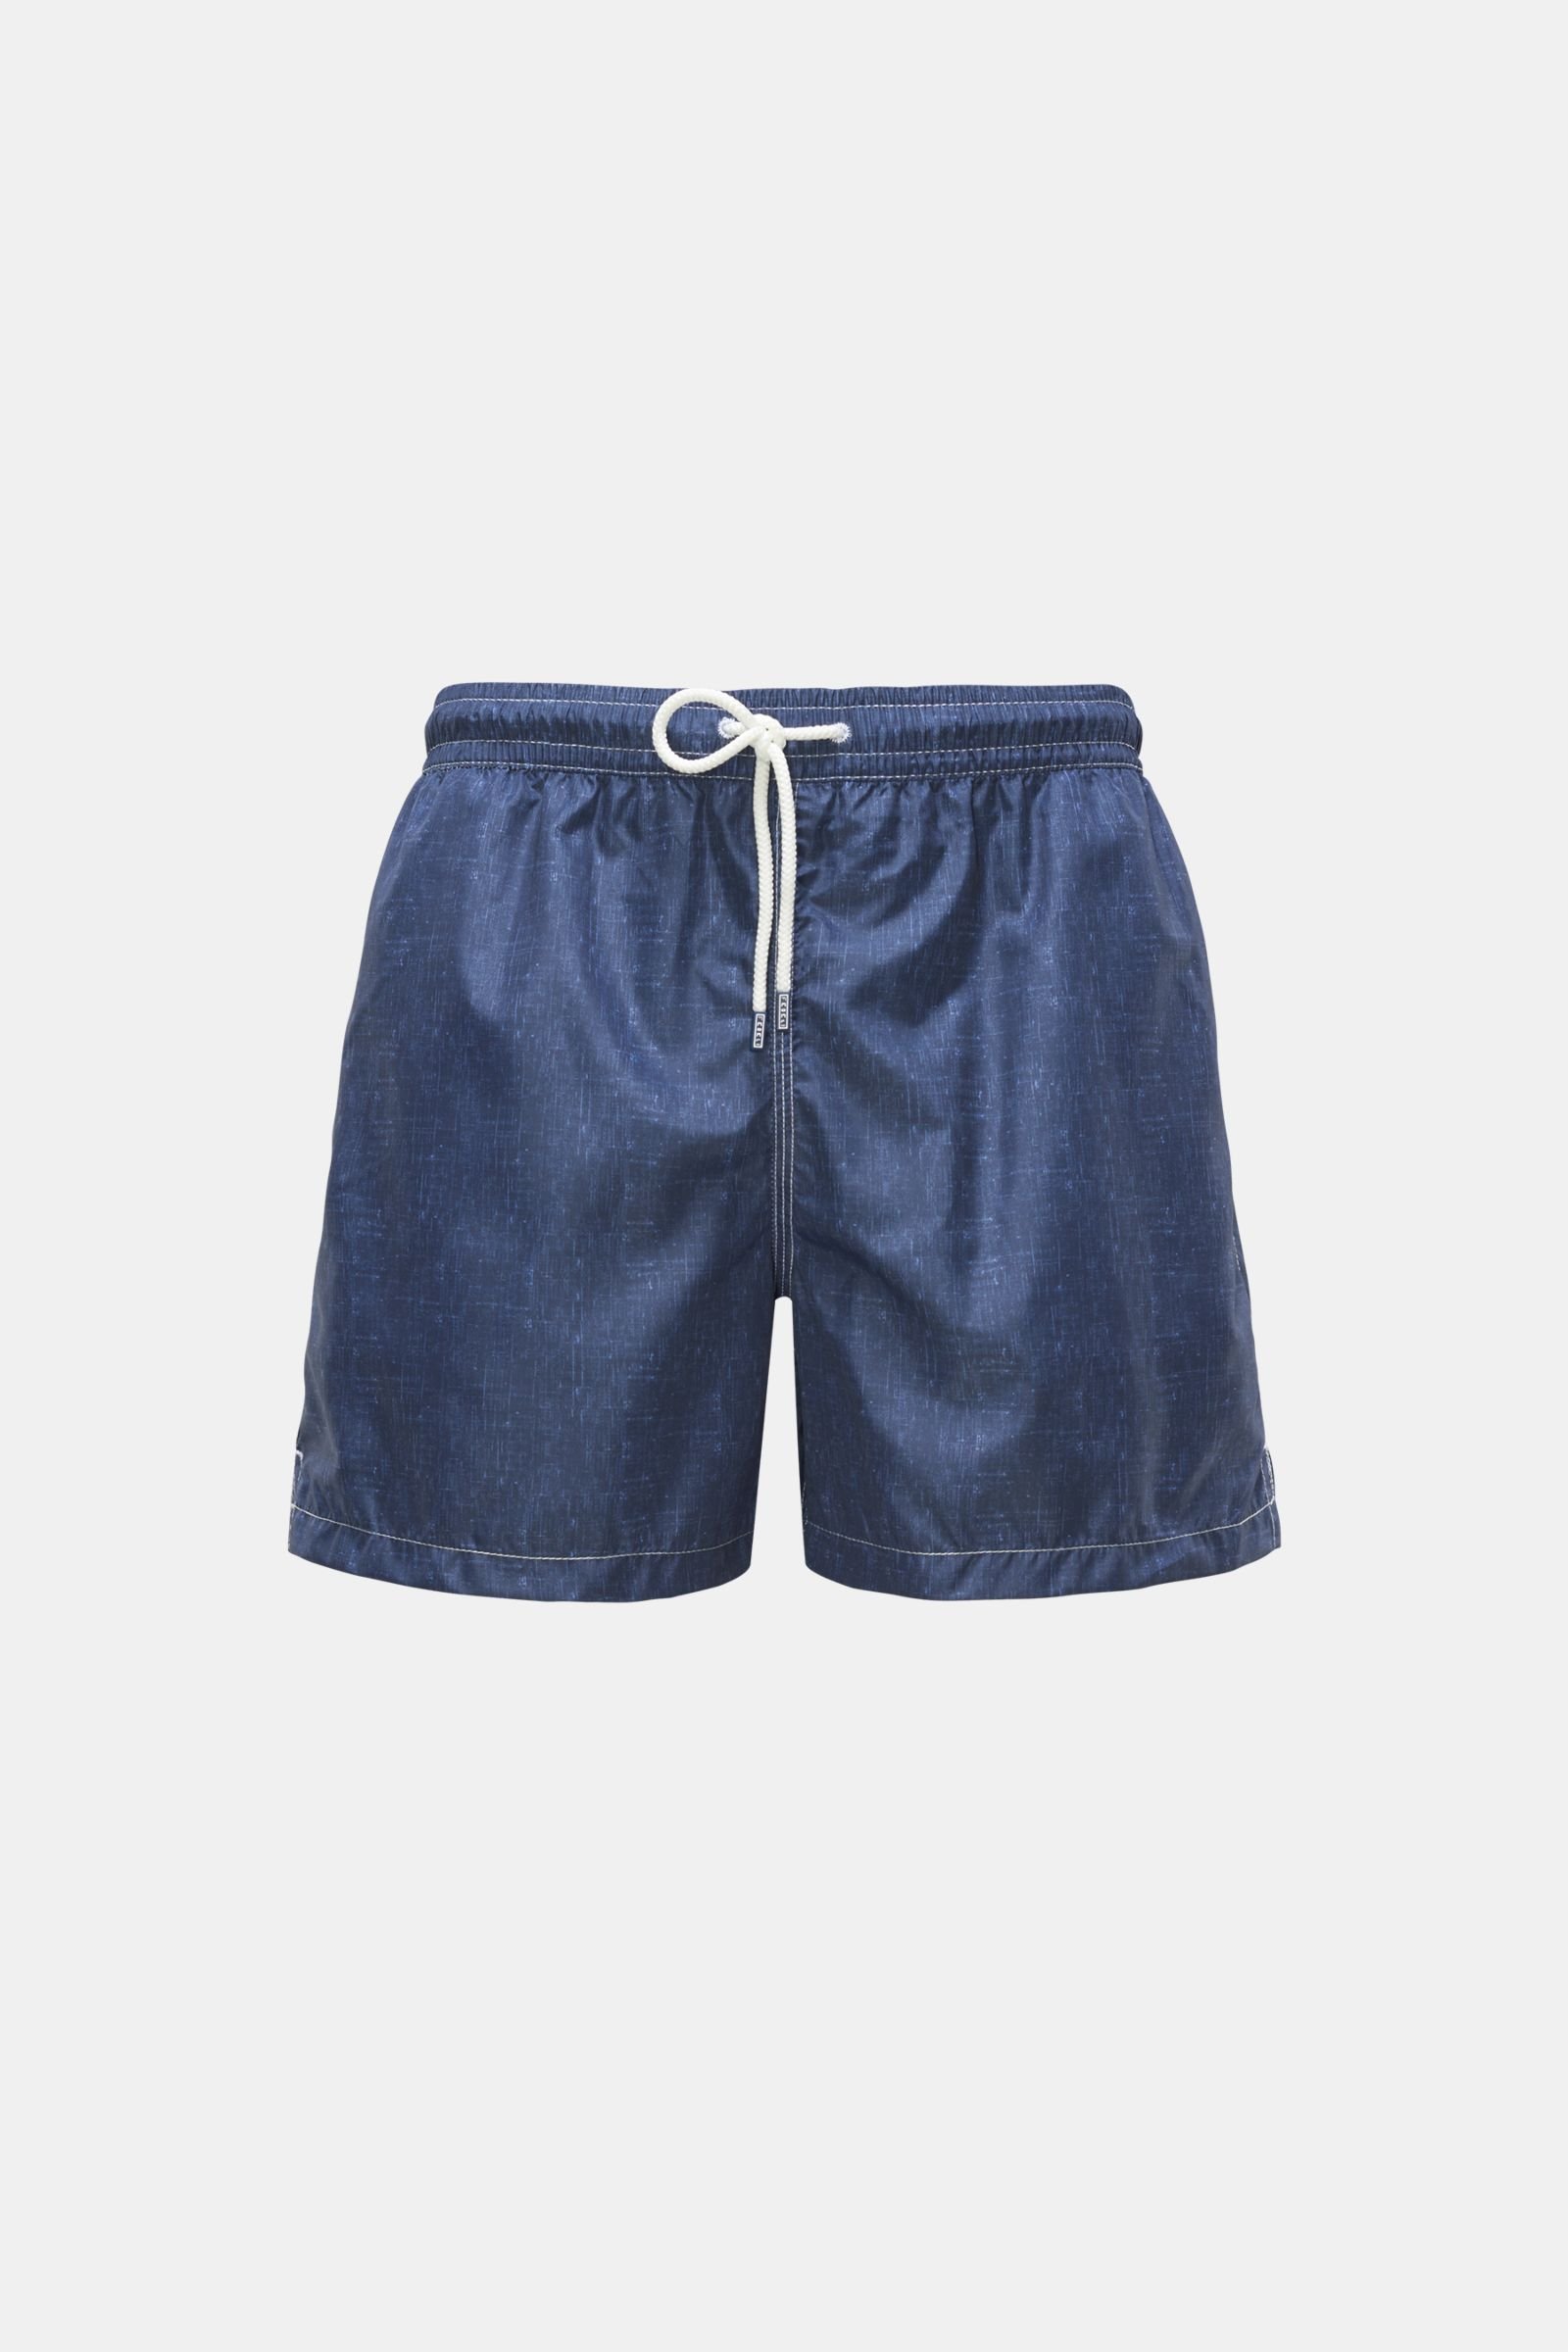 Swim shorts 'Madeira Airstop' navy patterned